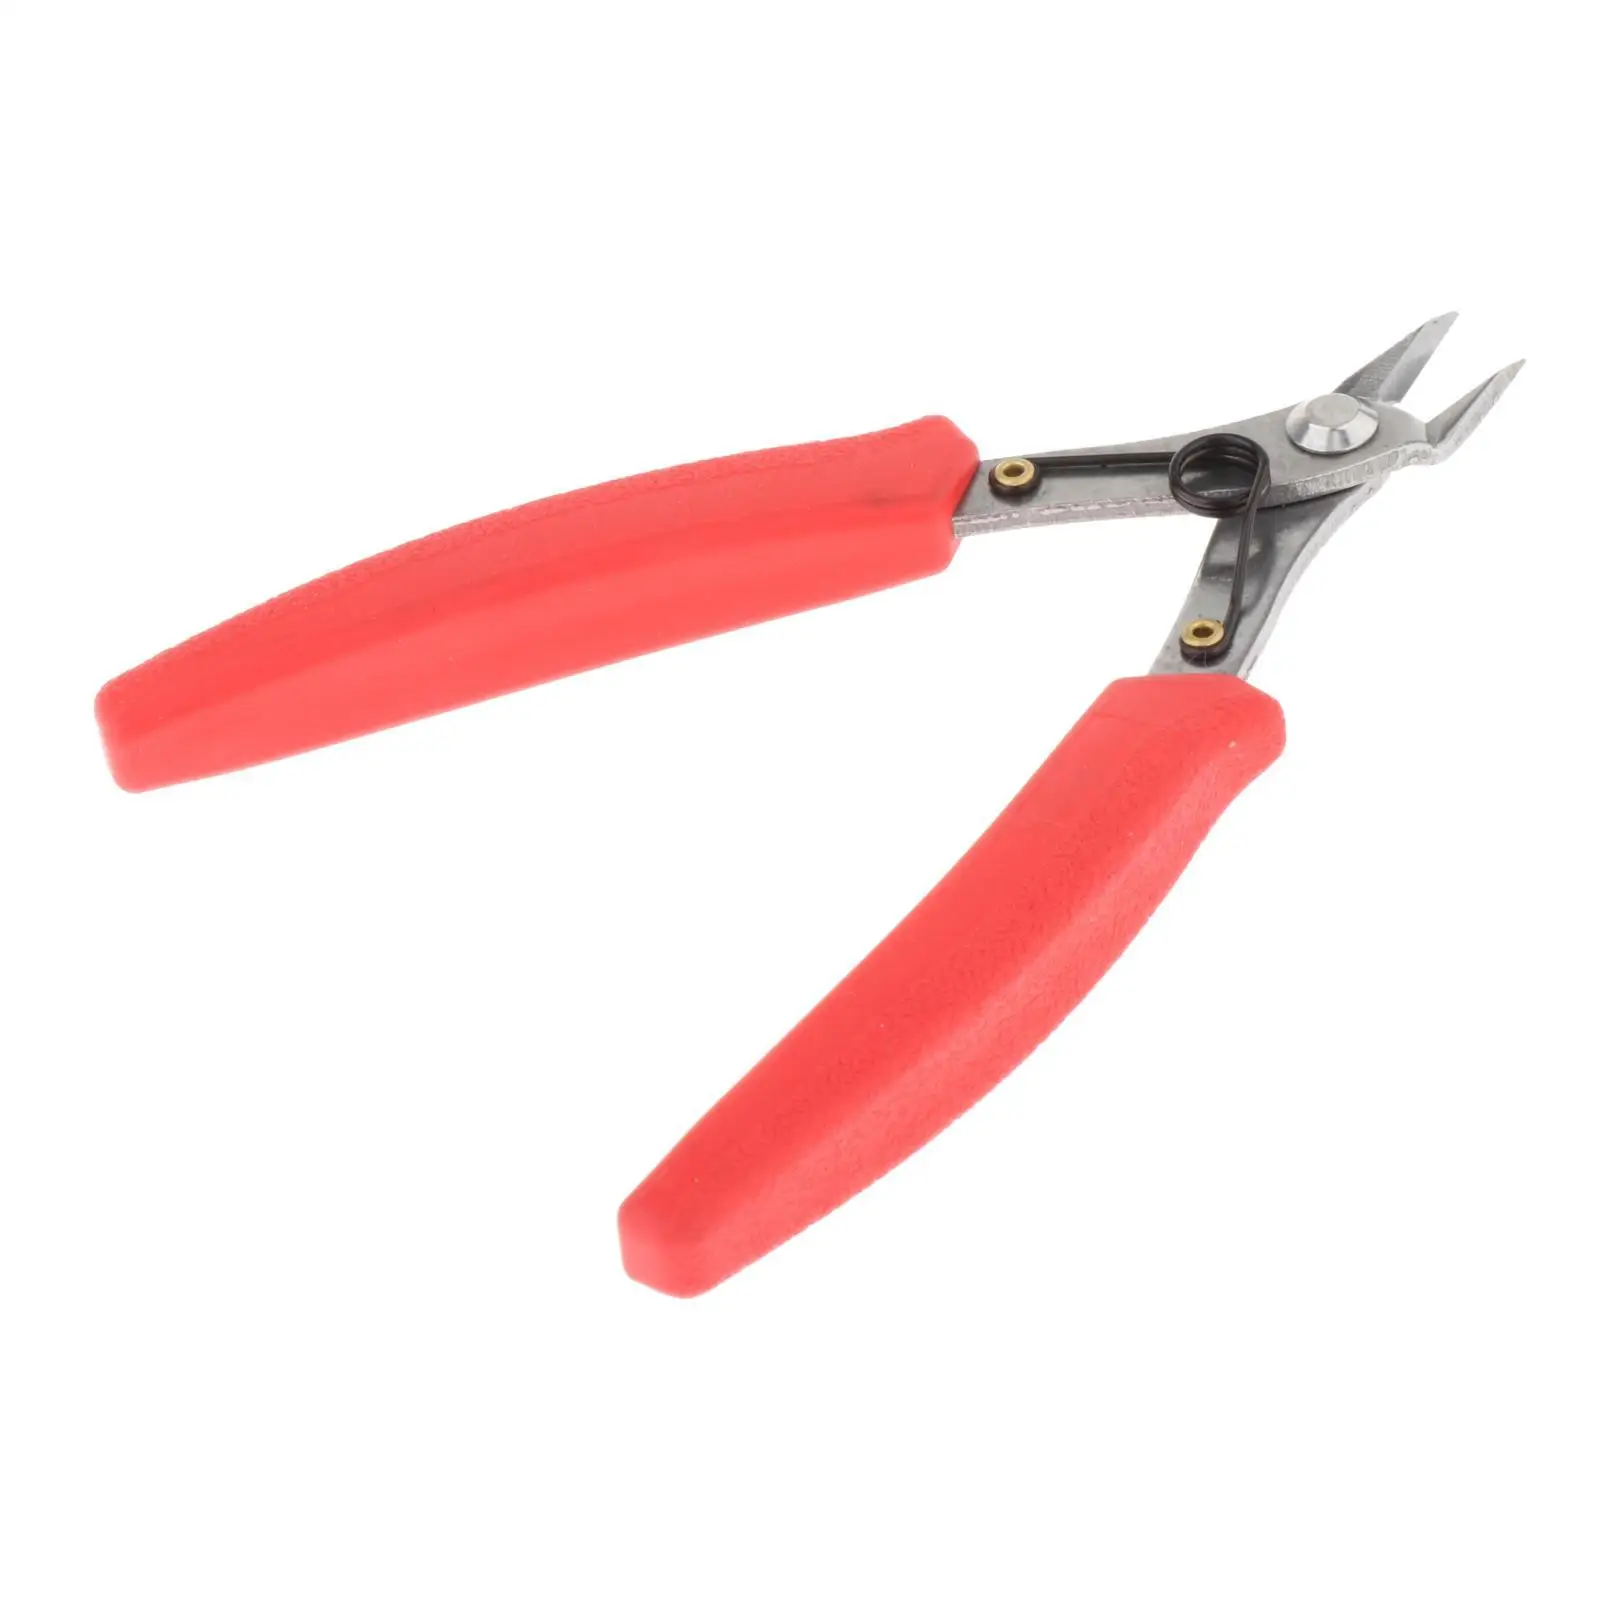 Portable Diagonal Cutting Pliers DIY Model Making for Crafts Wire Cutter